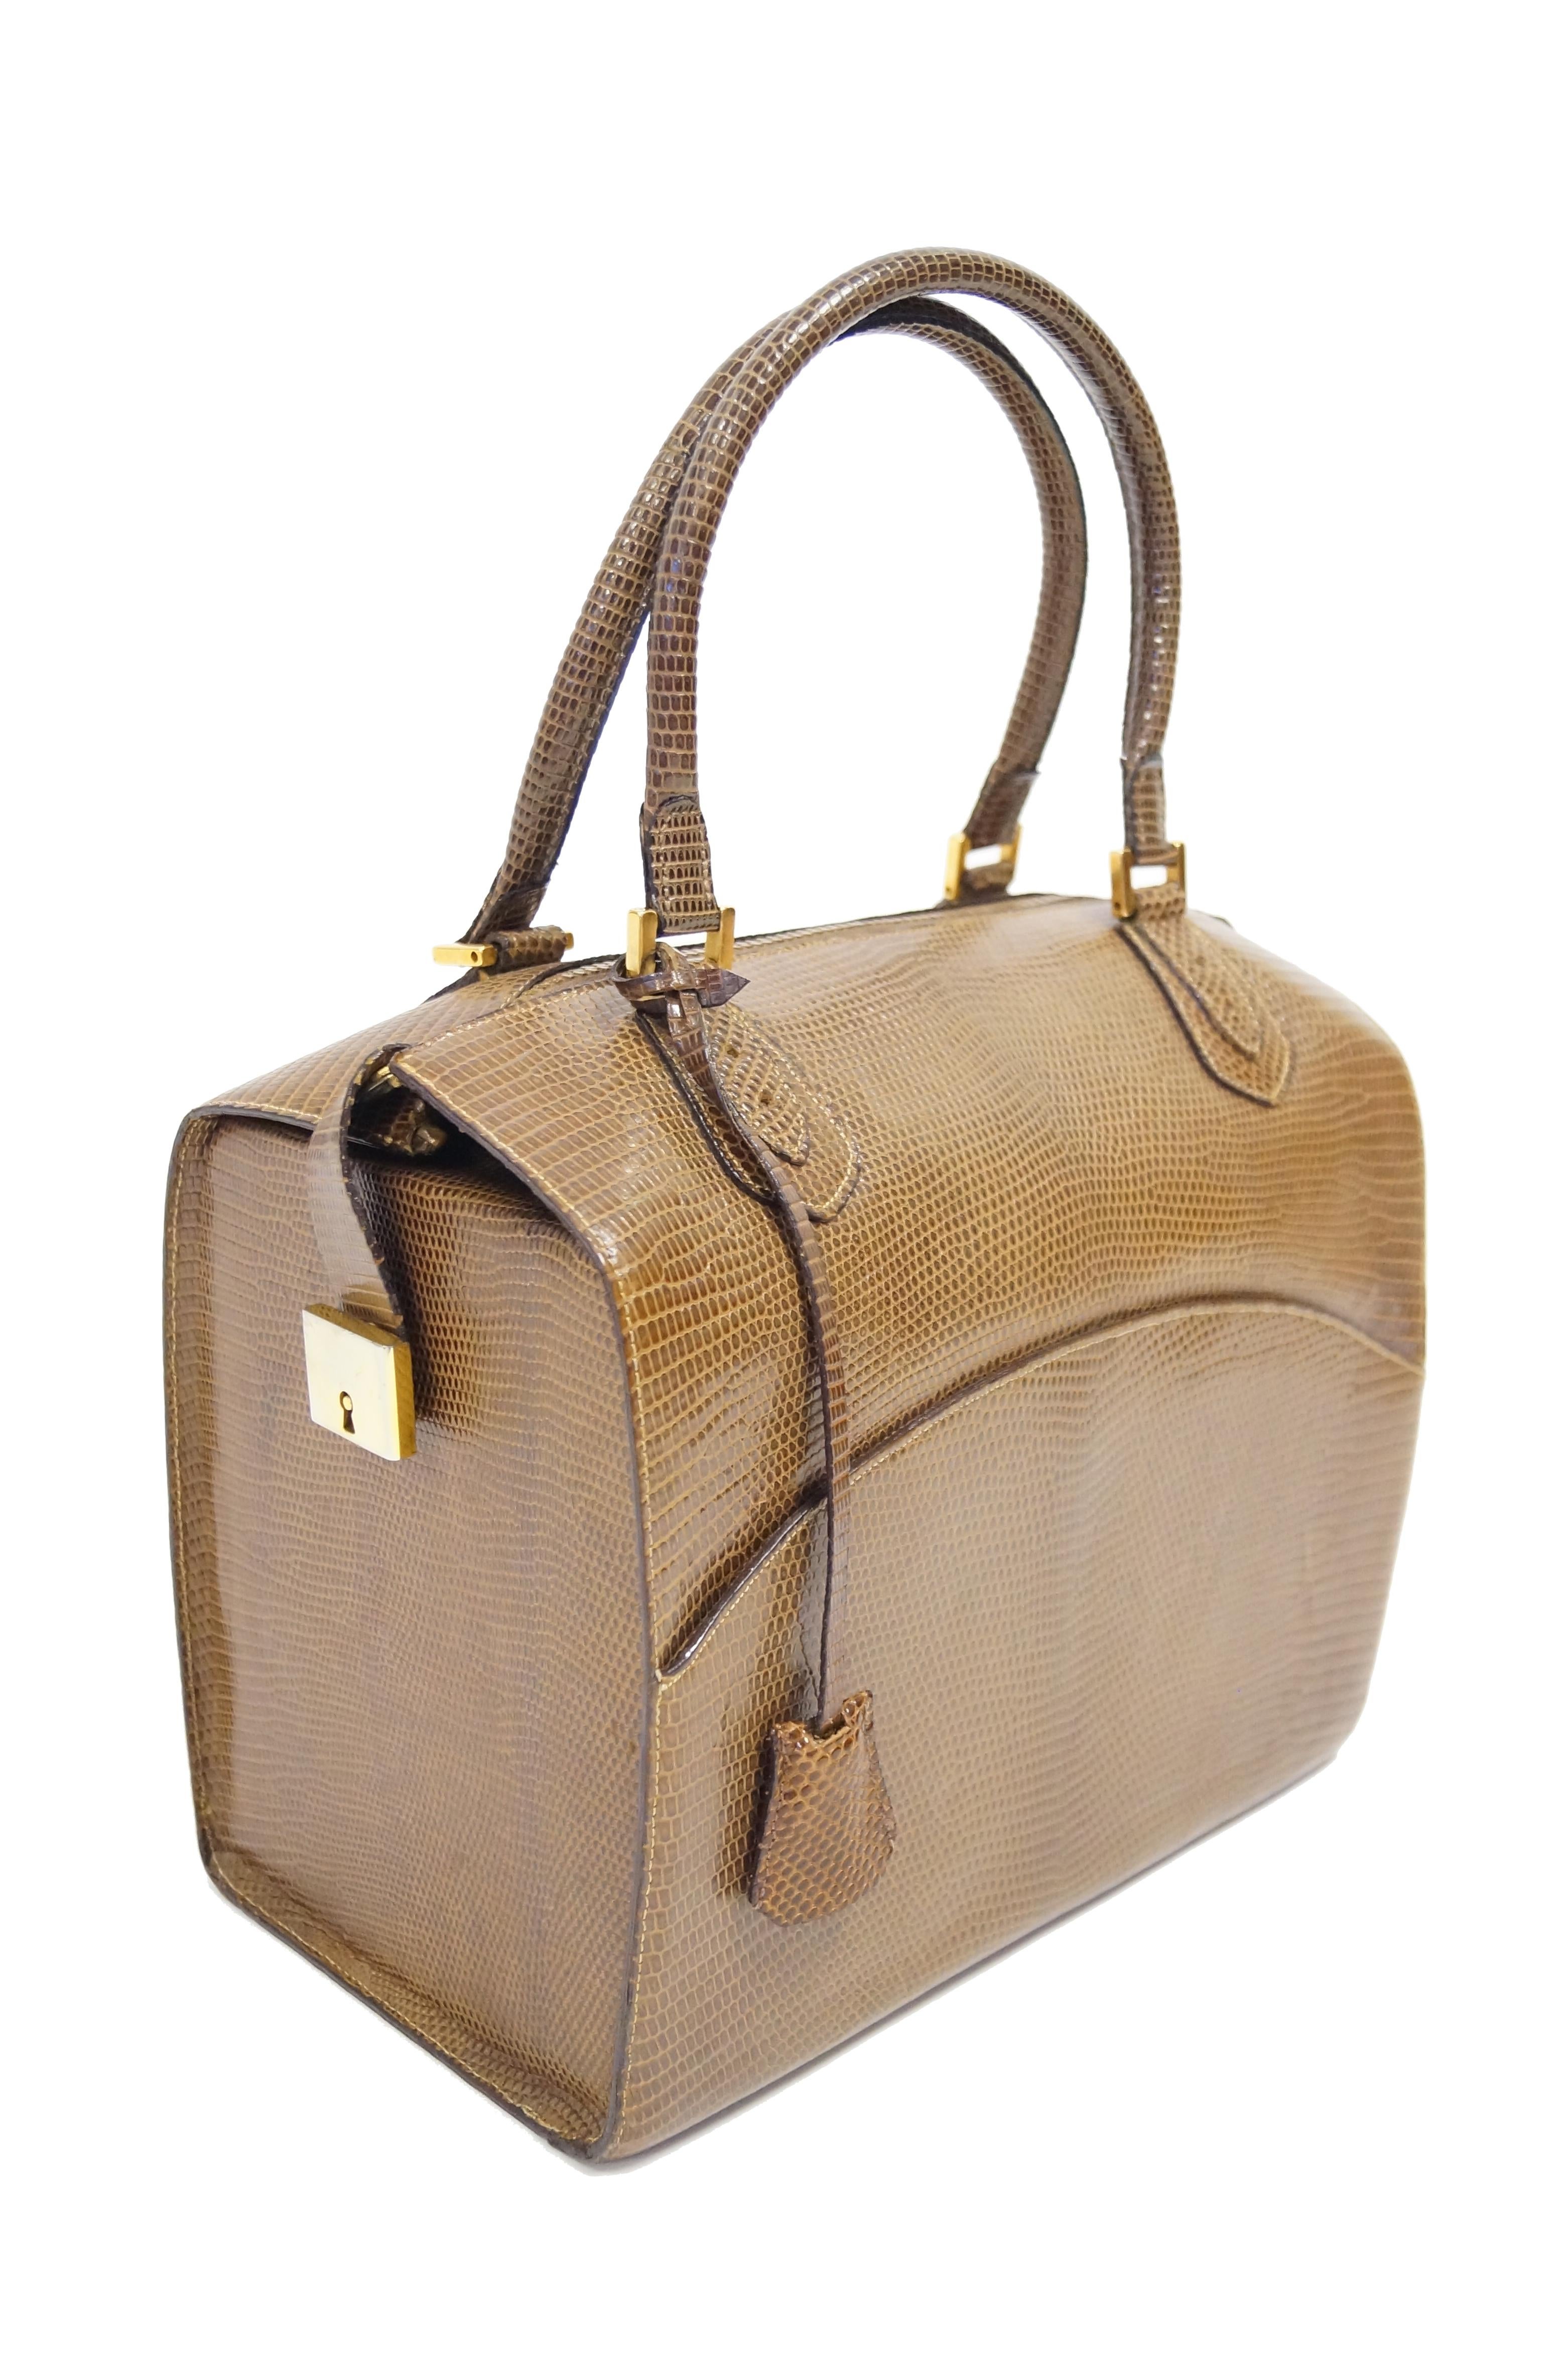 Wonderful structured chestnut brown Java lizard skin bag by Martin Van Schaak. This custom - made handbag with handles on  is somewhat reminiscent of the traditional doctor bag, with two top handles with a zippered opening in between. The exterior